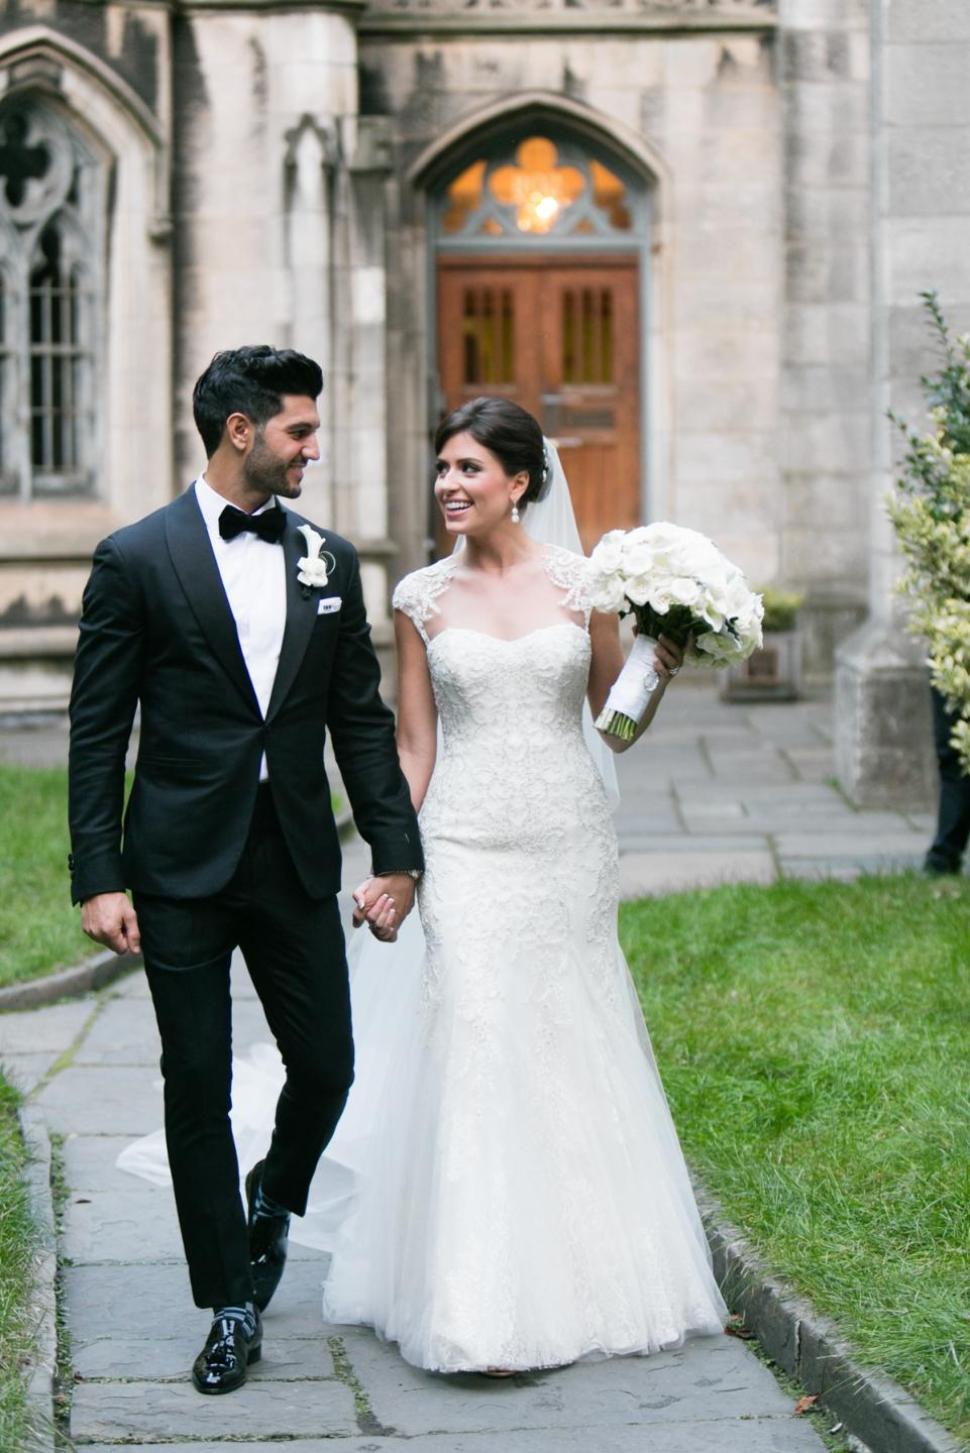 Chloe Melas and Brian Mazza swapped vows at Grace Church before heading to Capitale for their reception.